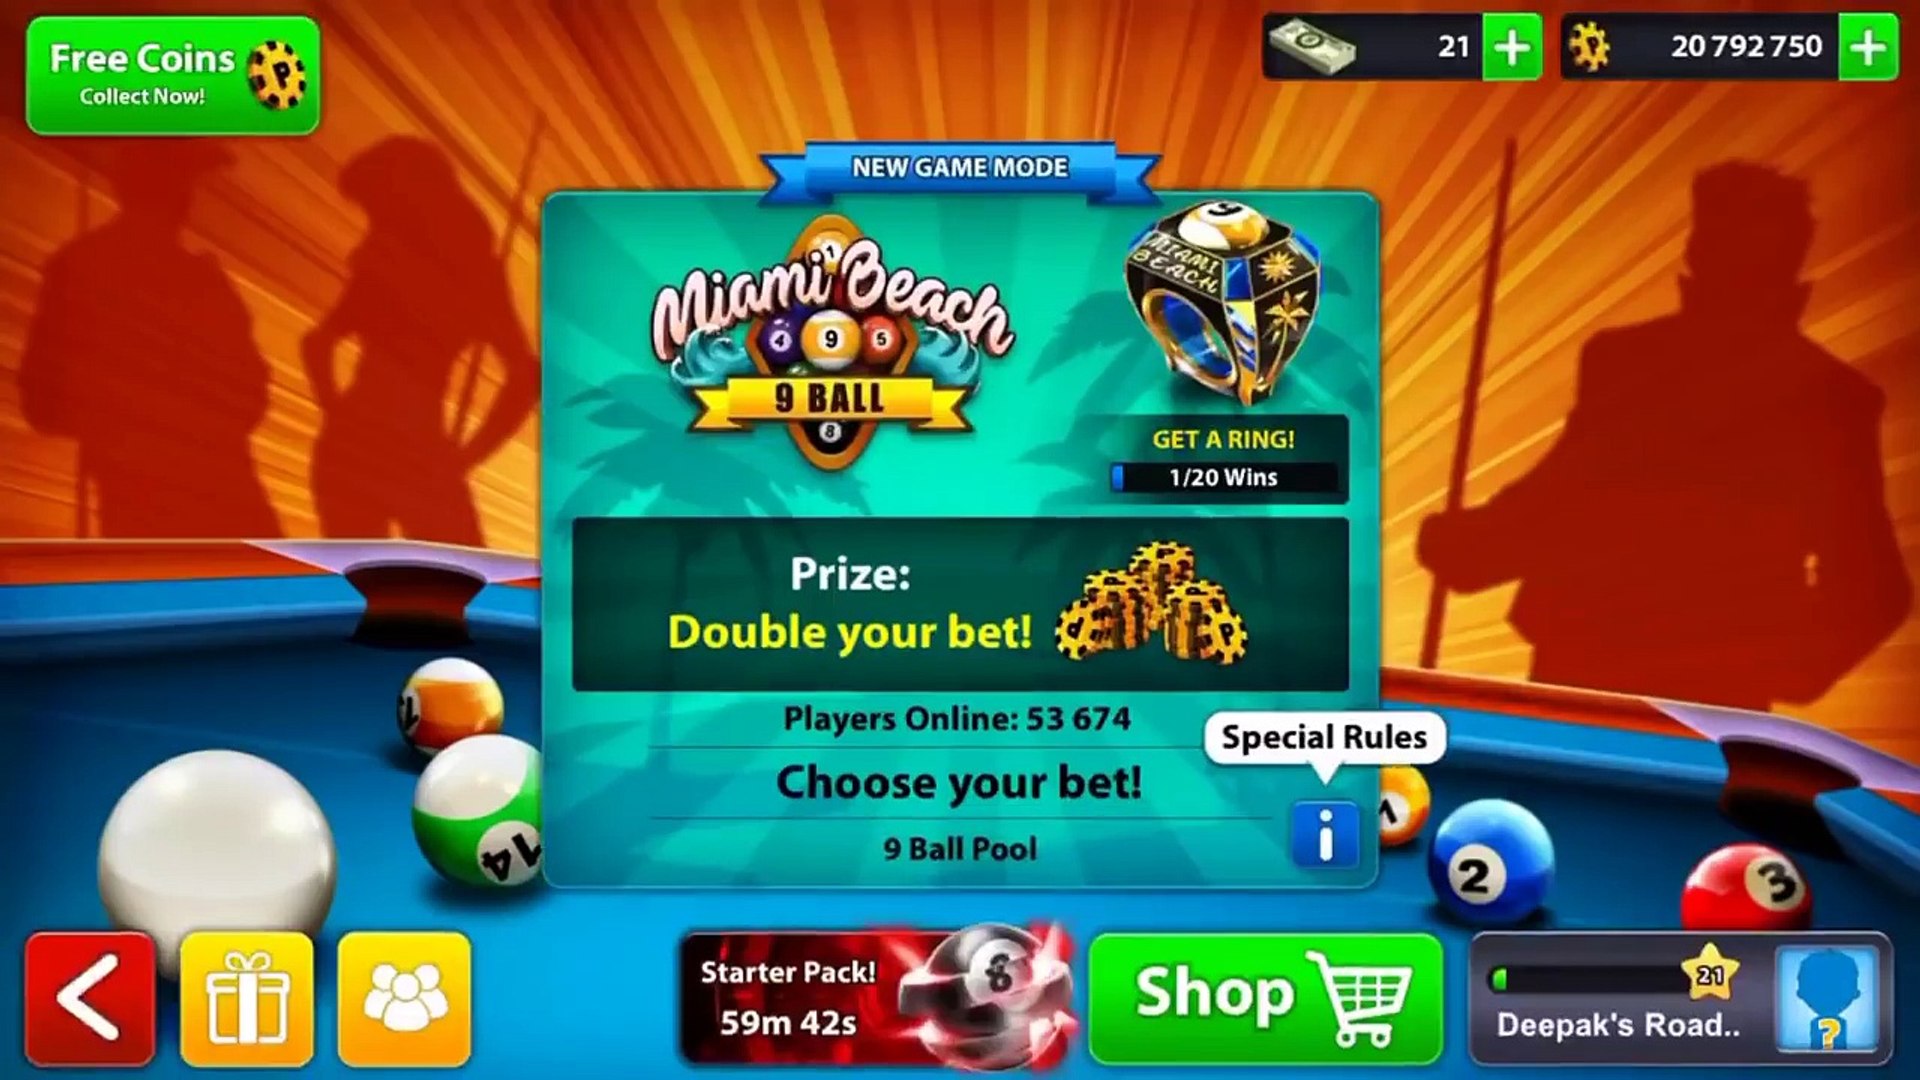 8 Ball Pool The Smartest Trick To Win Miami Beach 9 Ball Pool -Deepaks Road  Ep 21- - New Update -─影片 Dailymotion